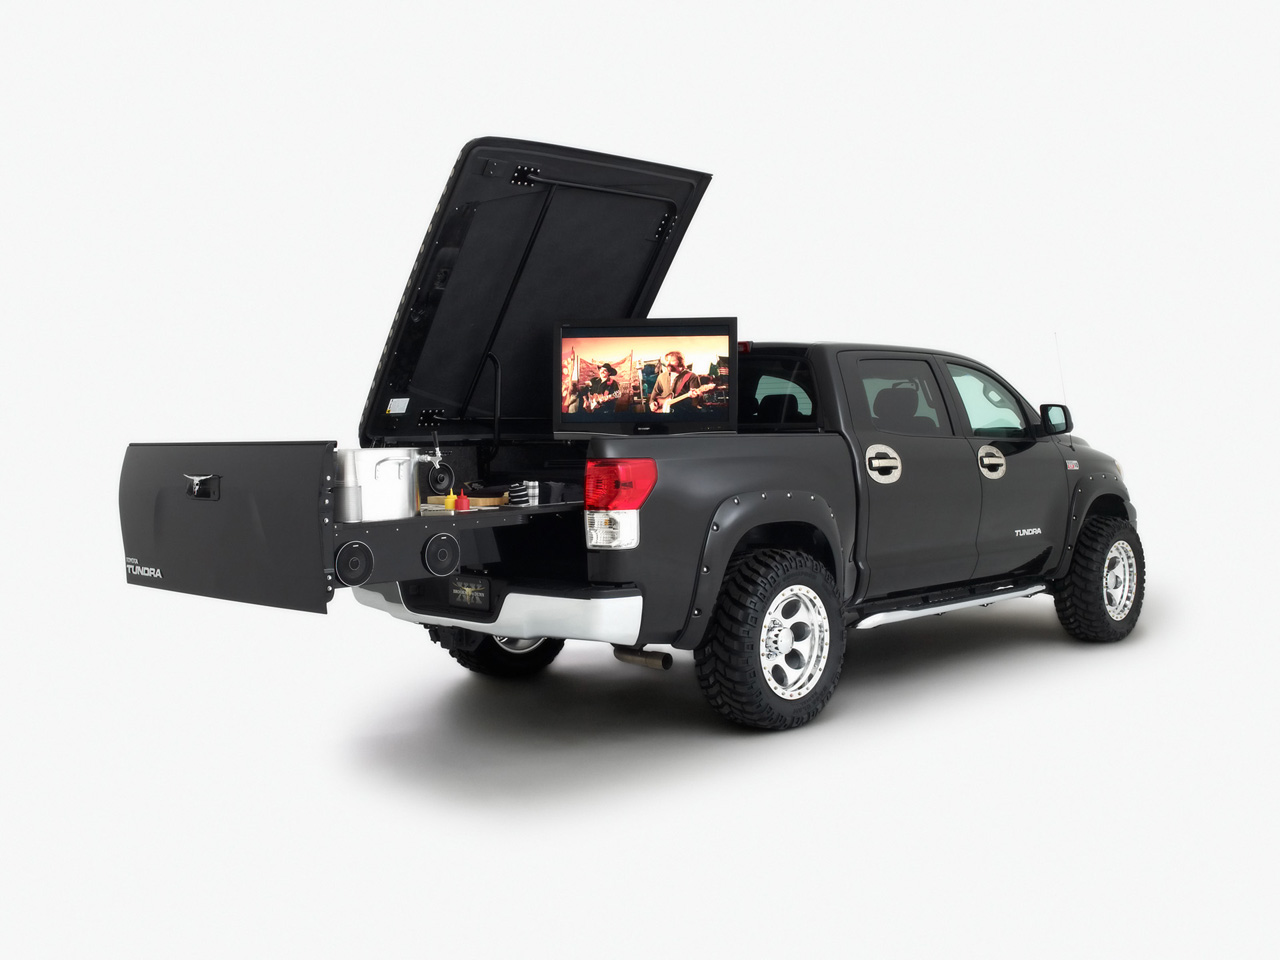 2009 Toyota B and D Tundra Tailgater - Rear Angle - 1280x960 ...